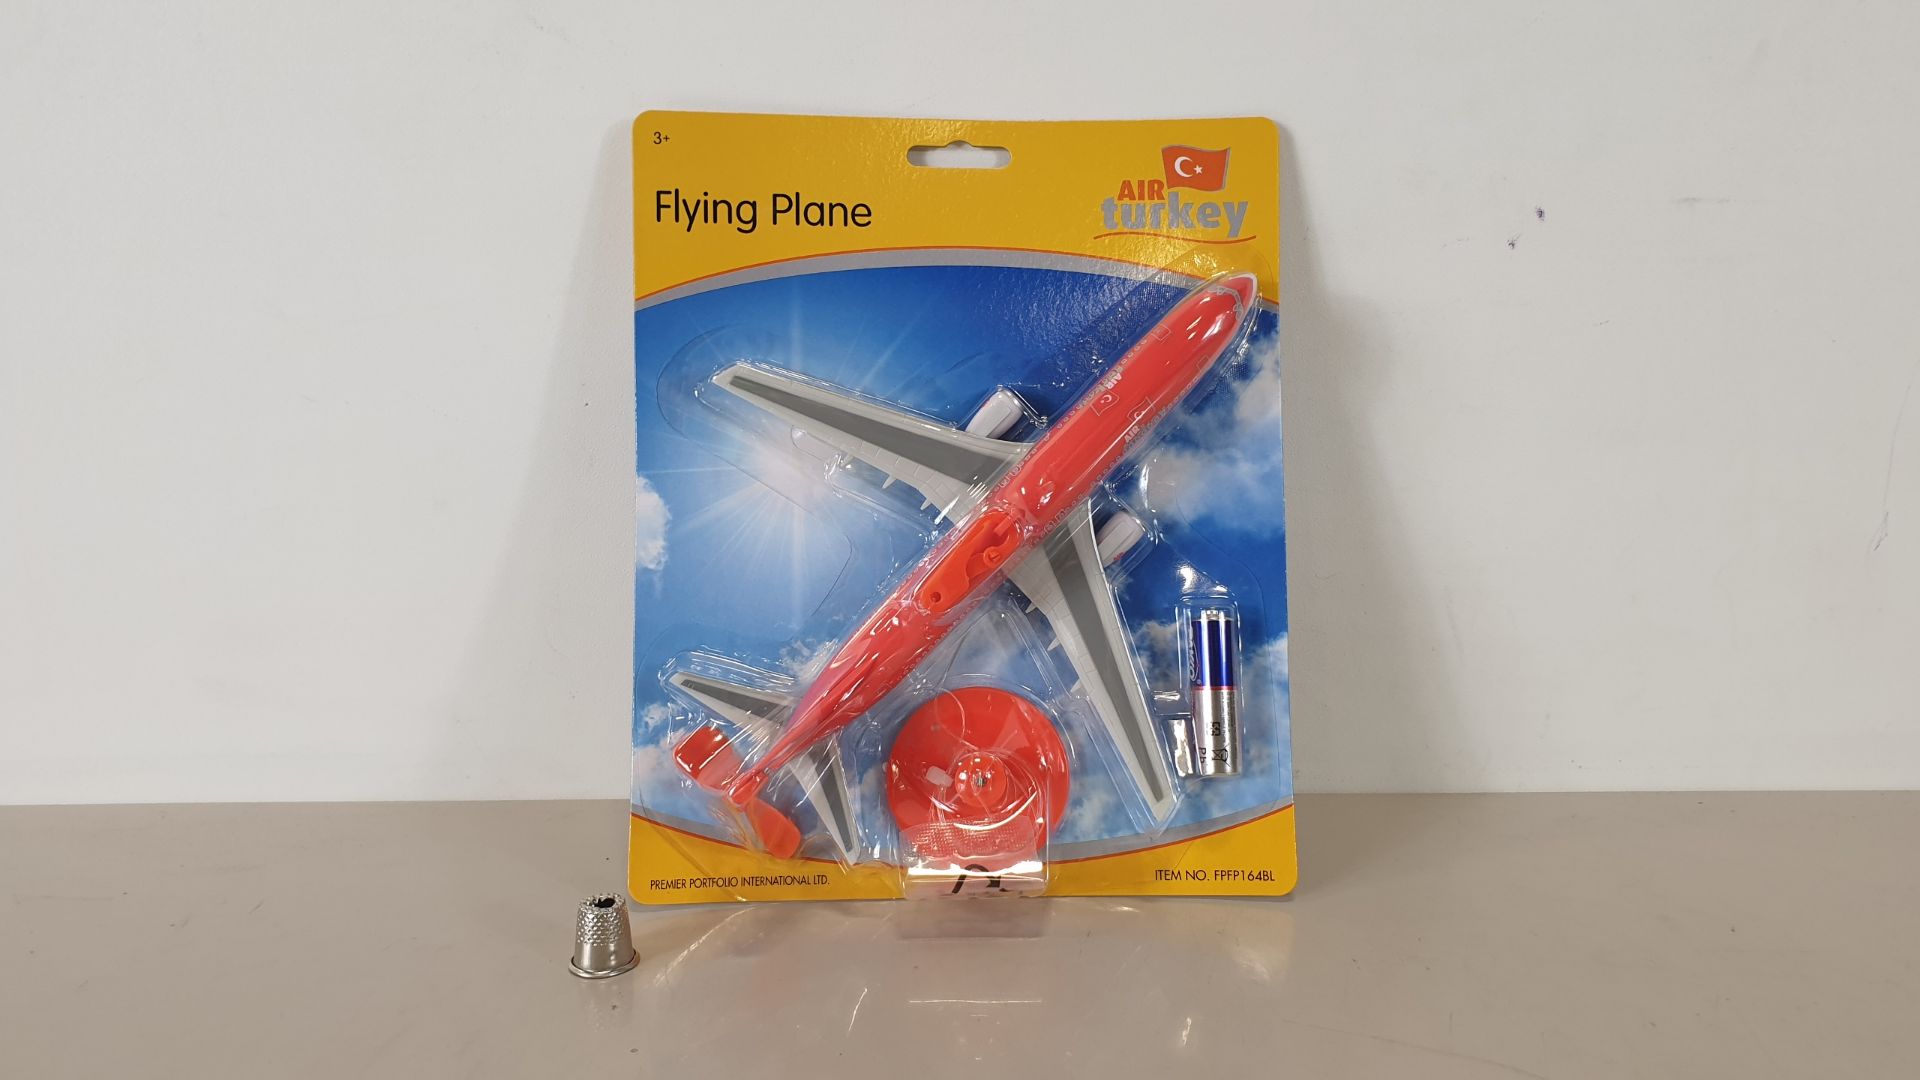 48 X BRAND NEW FLYING PLANE TOY - BATTERY IS INCLUDED - AIRTURKEY DESIGN (FPFP164BL) - IN 1 CARTON -